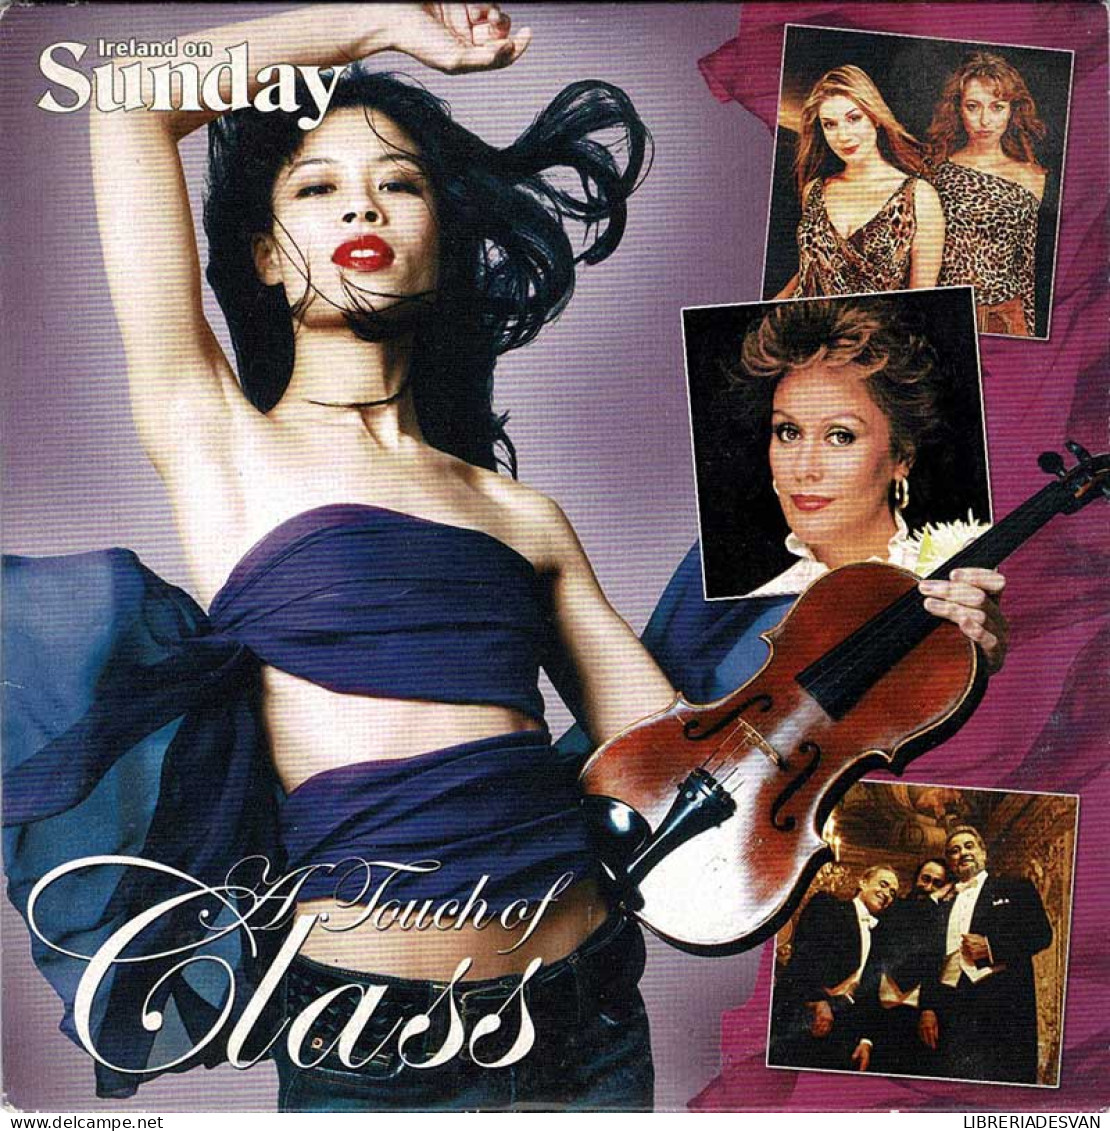 Ireland On Sunday. A Touch Of Class. CD - Classical